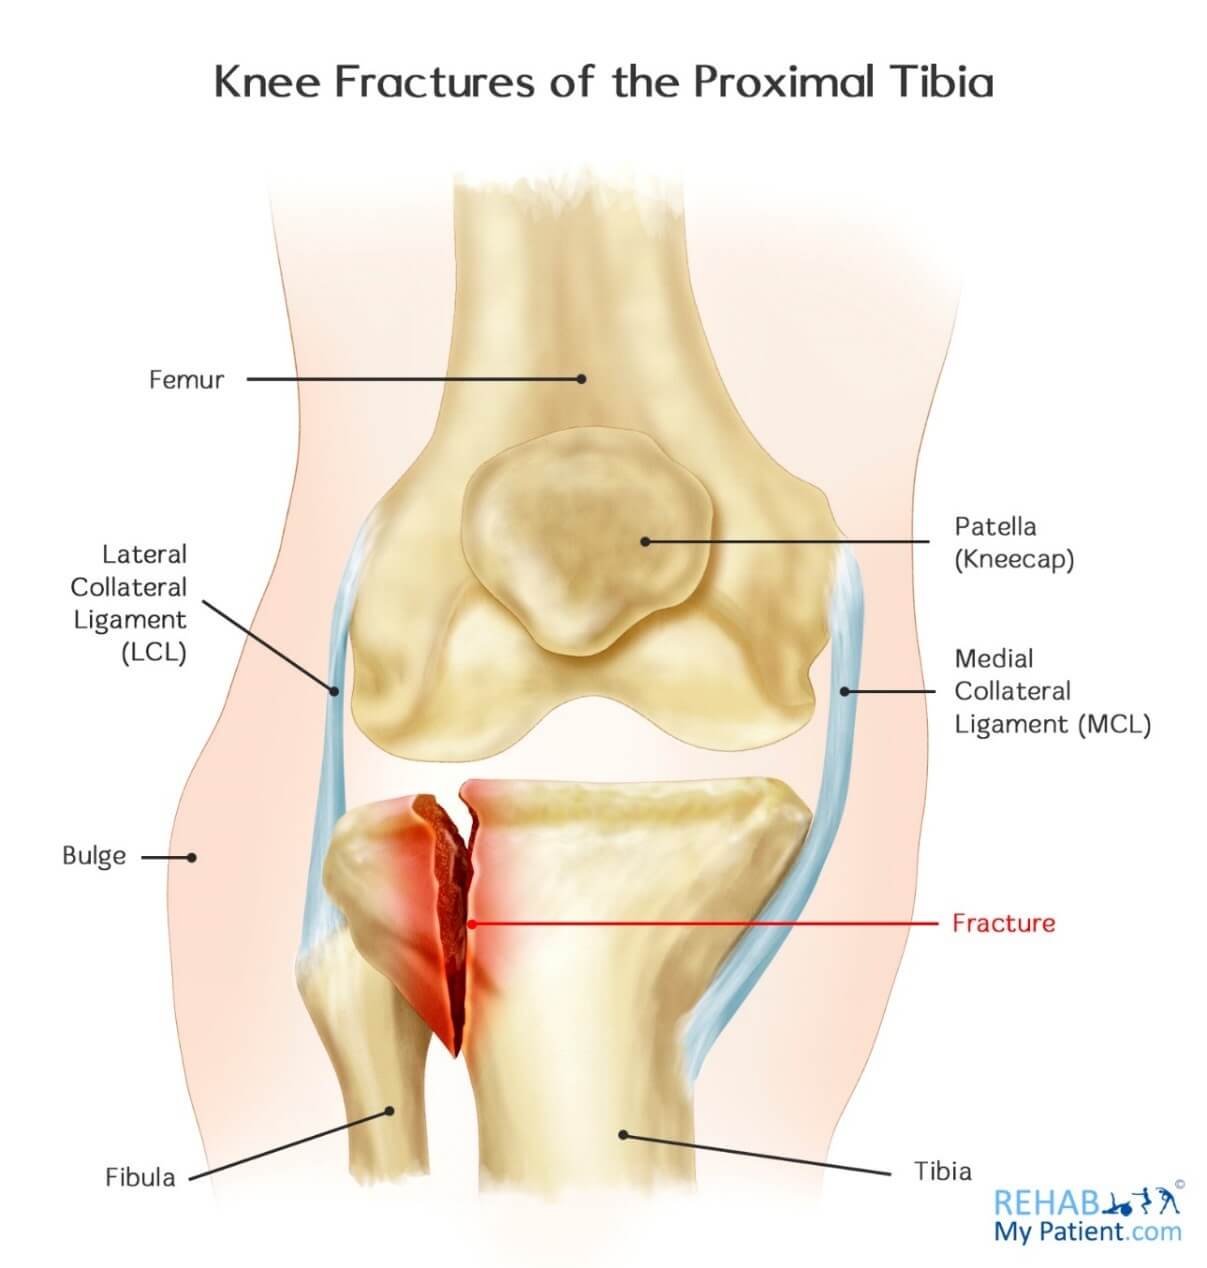 knee_fractures_of_the_proximal_tibia.jpg